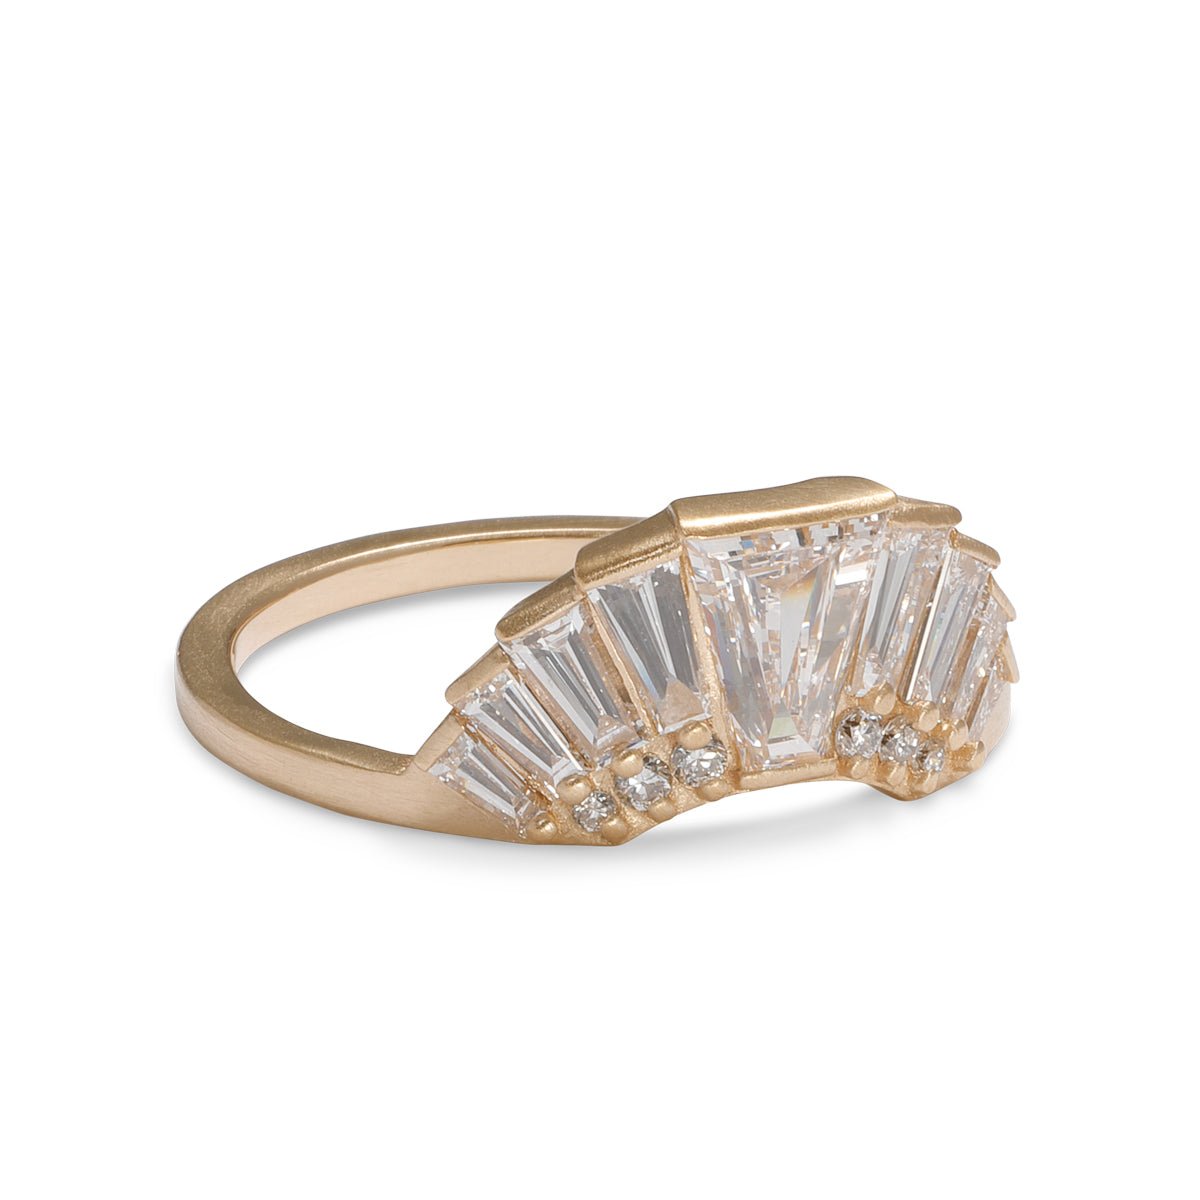 Apricus 14K recycled gold stacking ring, with lab-grown diamonds. Designed and handcrafted in Portland, Oregon.